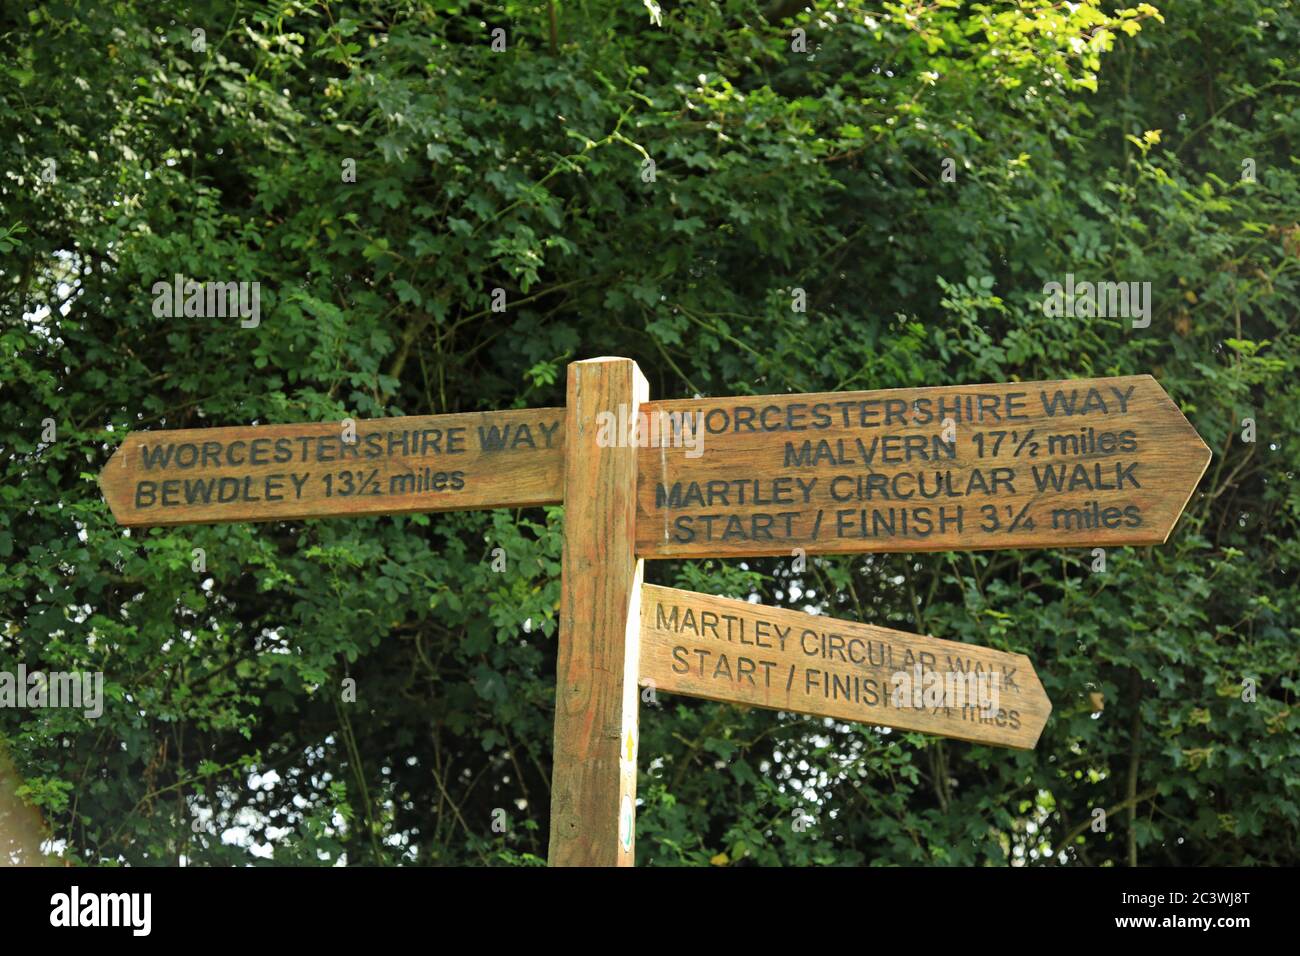 Footpath signpost on the Worcestershire way, England, UK. Stock Photo